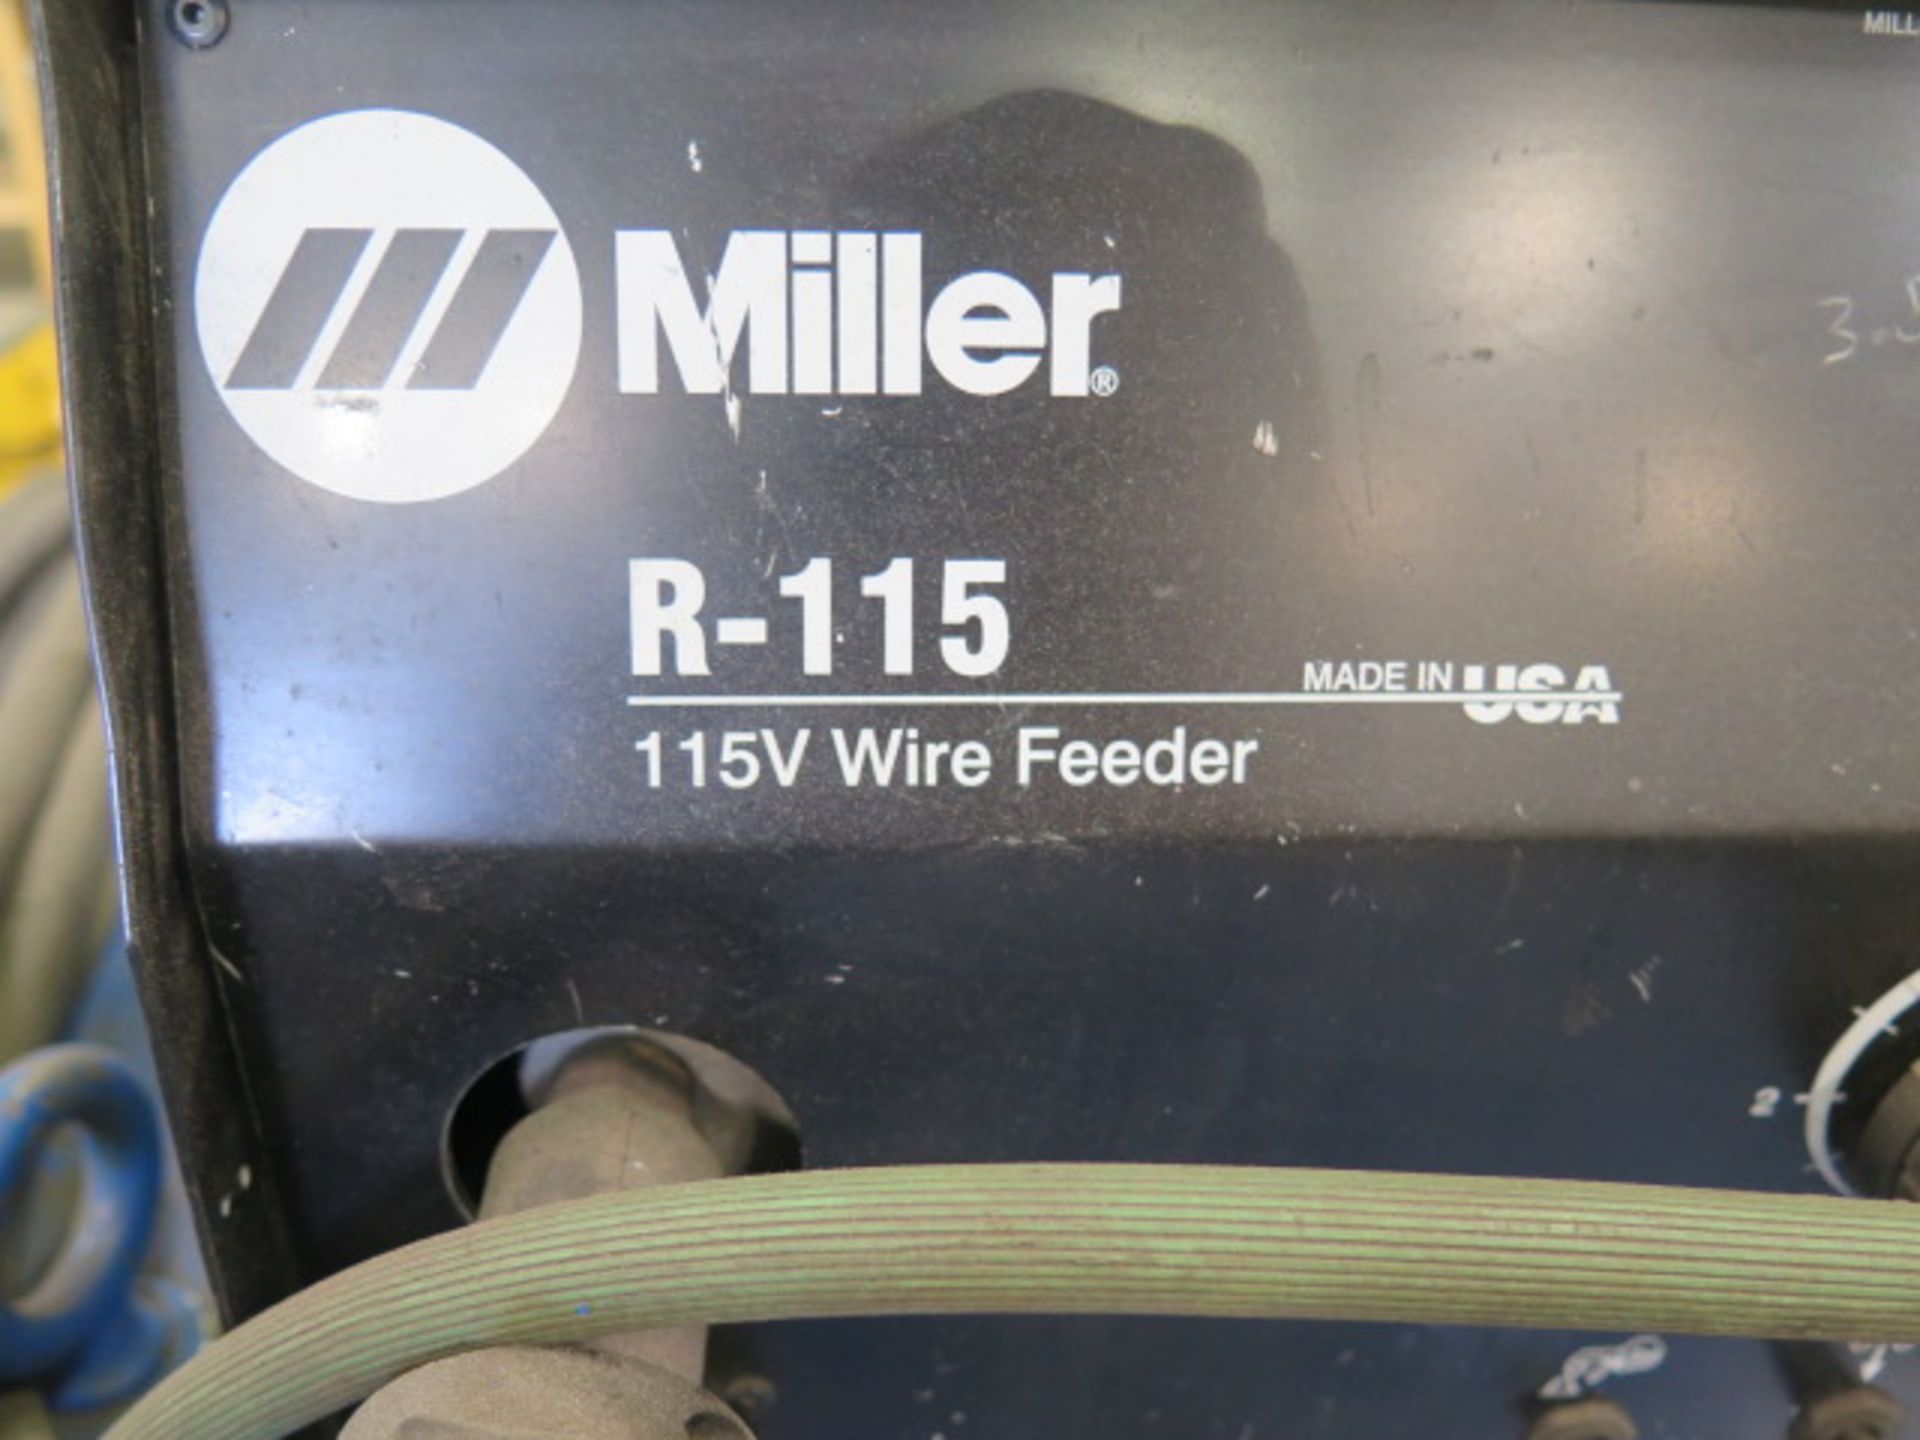 Miller CP-250TS CP-DC Arc Welding Power Source s/n R373965 w/ Miller R-115 Wire Feeder SOLD AS-IS - - Image 7 of 9